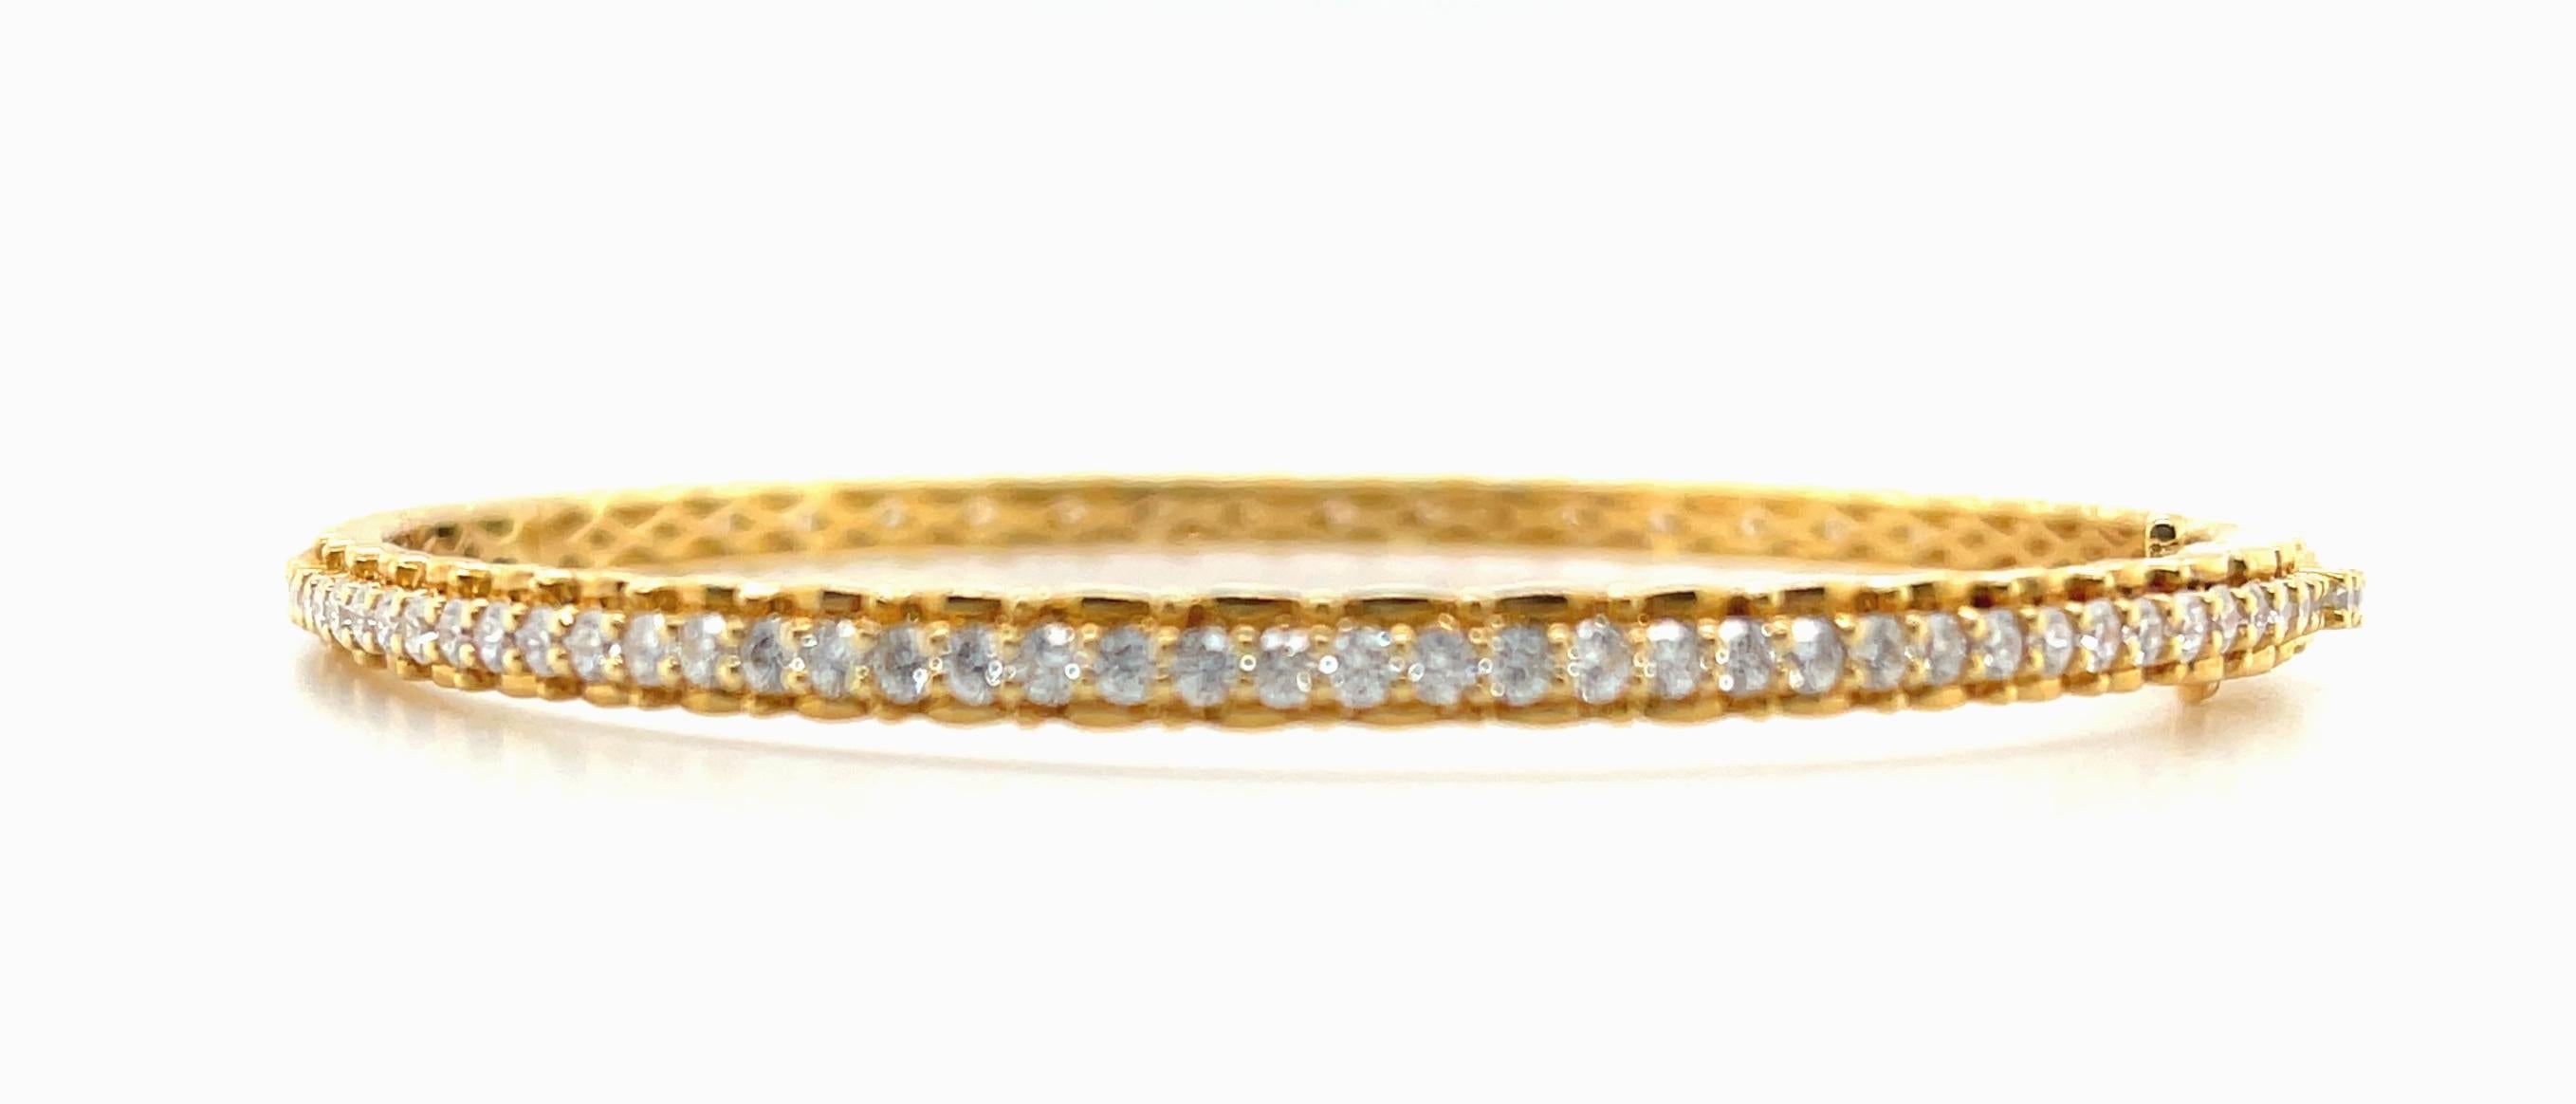 This beautiful 18k yellow gold bangle bracelet is set with exactly 100 round brilliant-cut diamonds weighing 2.63 carats total! The center row of diamonds raised against high karat gold scalloped borders, giving this gorgeous bracelet extra